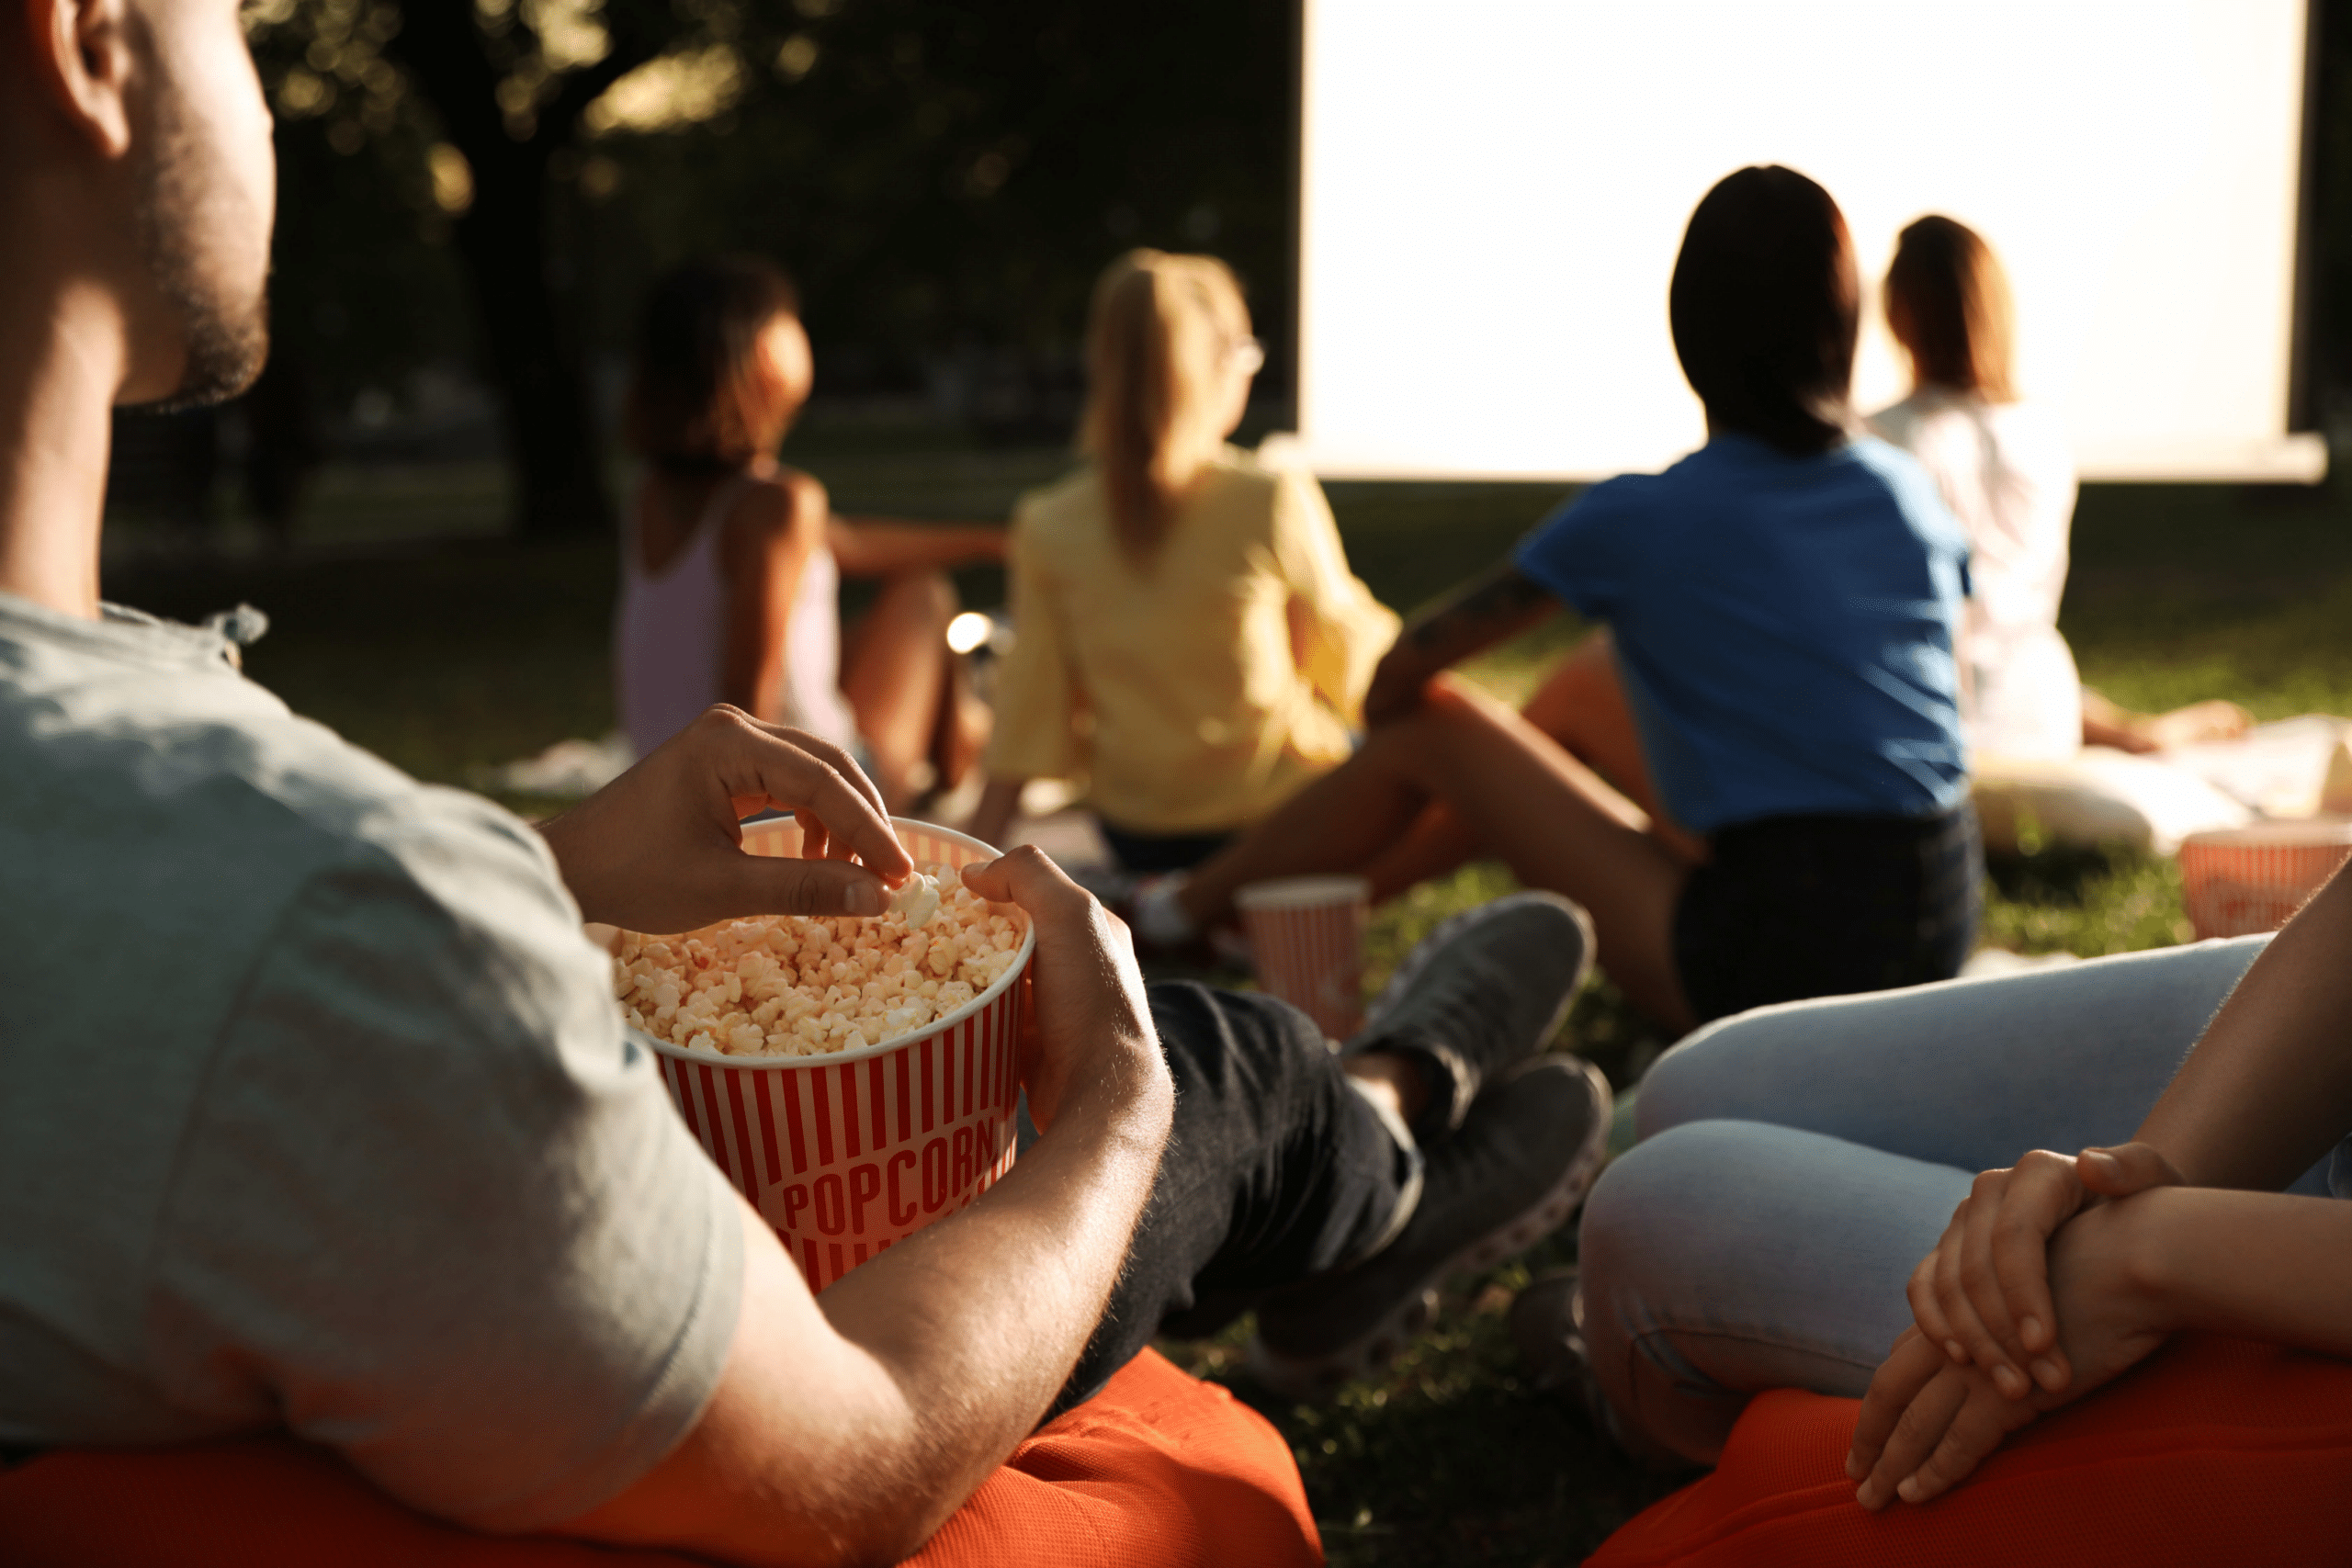 A group of college students outside sitting on the ground watching a movie on a big screen, with one guy eating popcorn